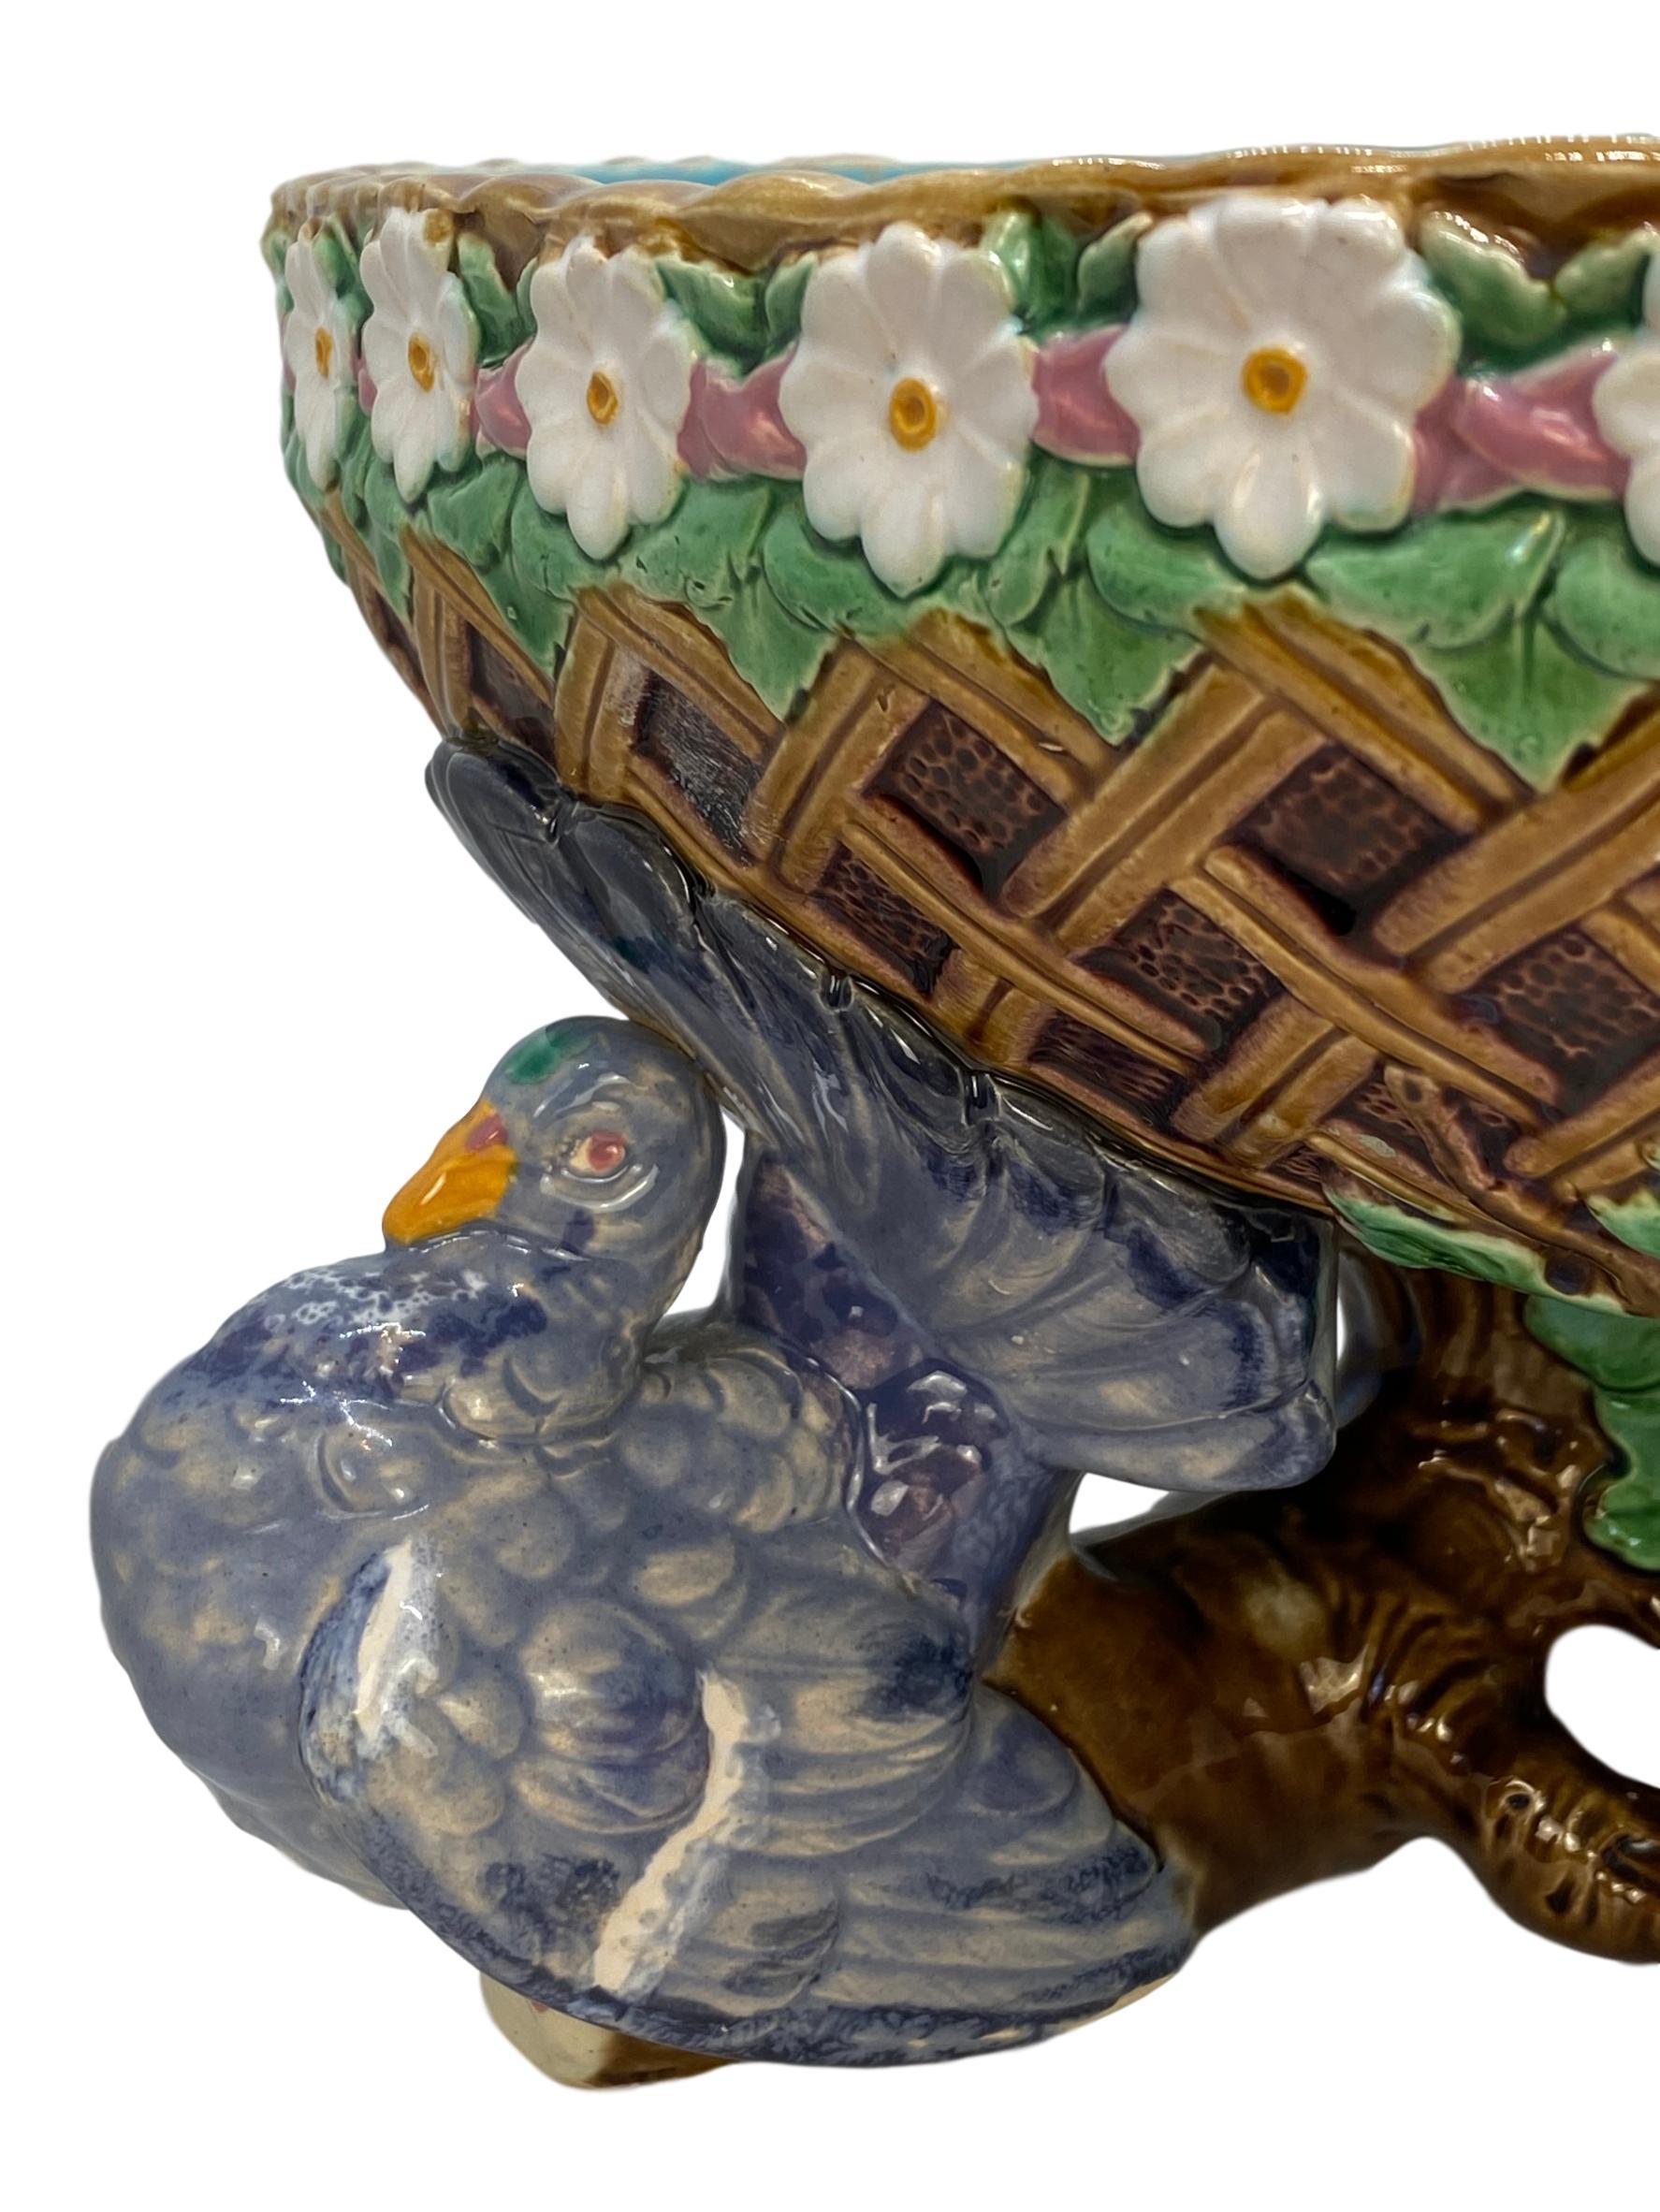 19th Century Minton Majolica Large Fruit Bowl with Three Pigeons Support, English, Dated 1870 For Sale